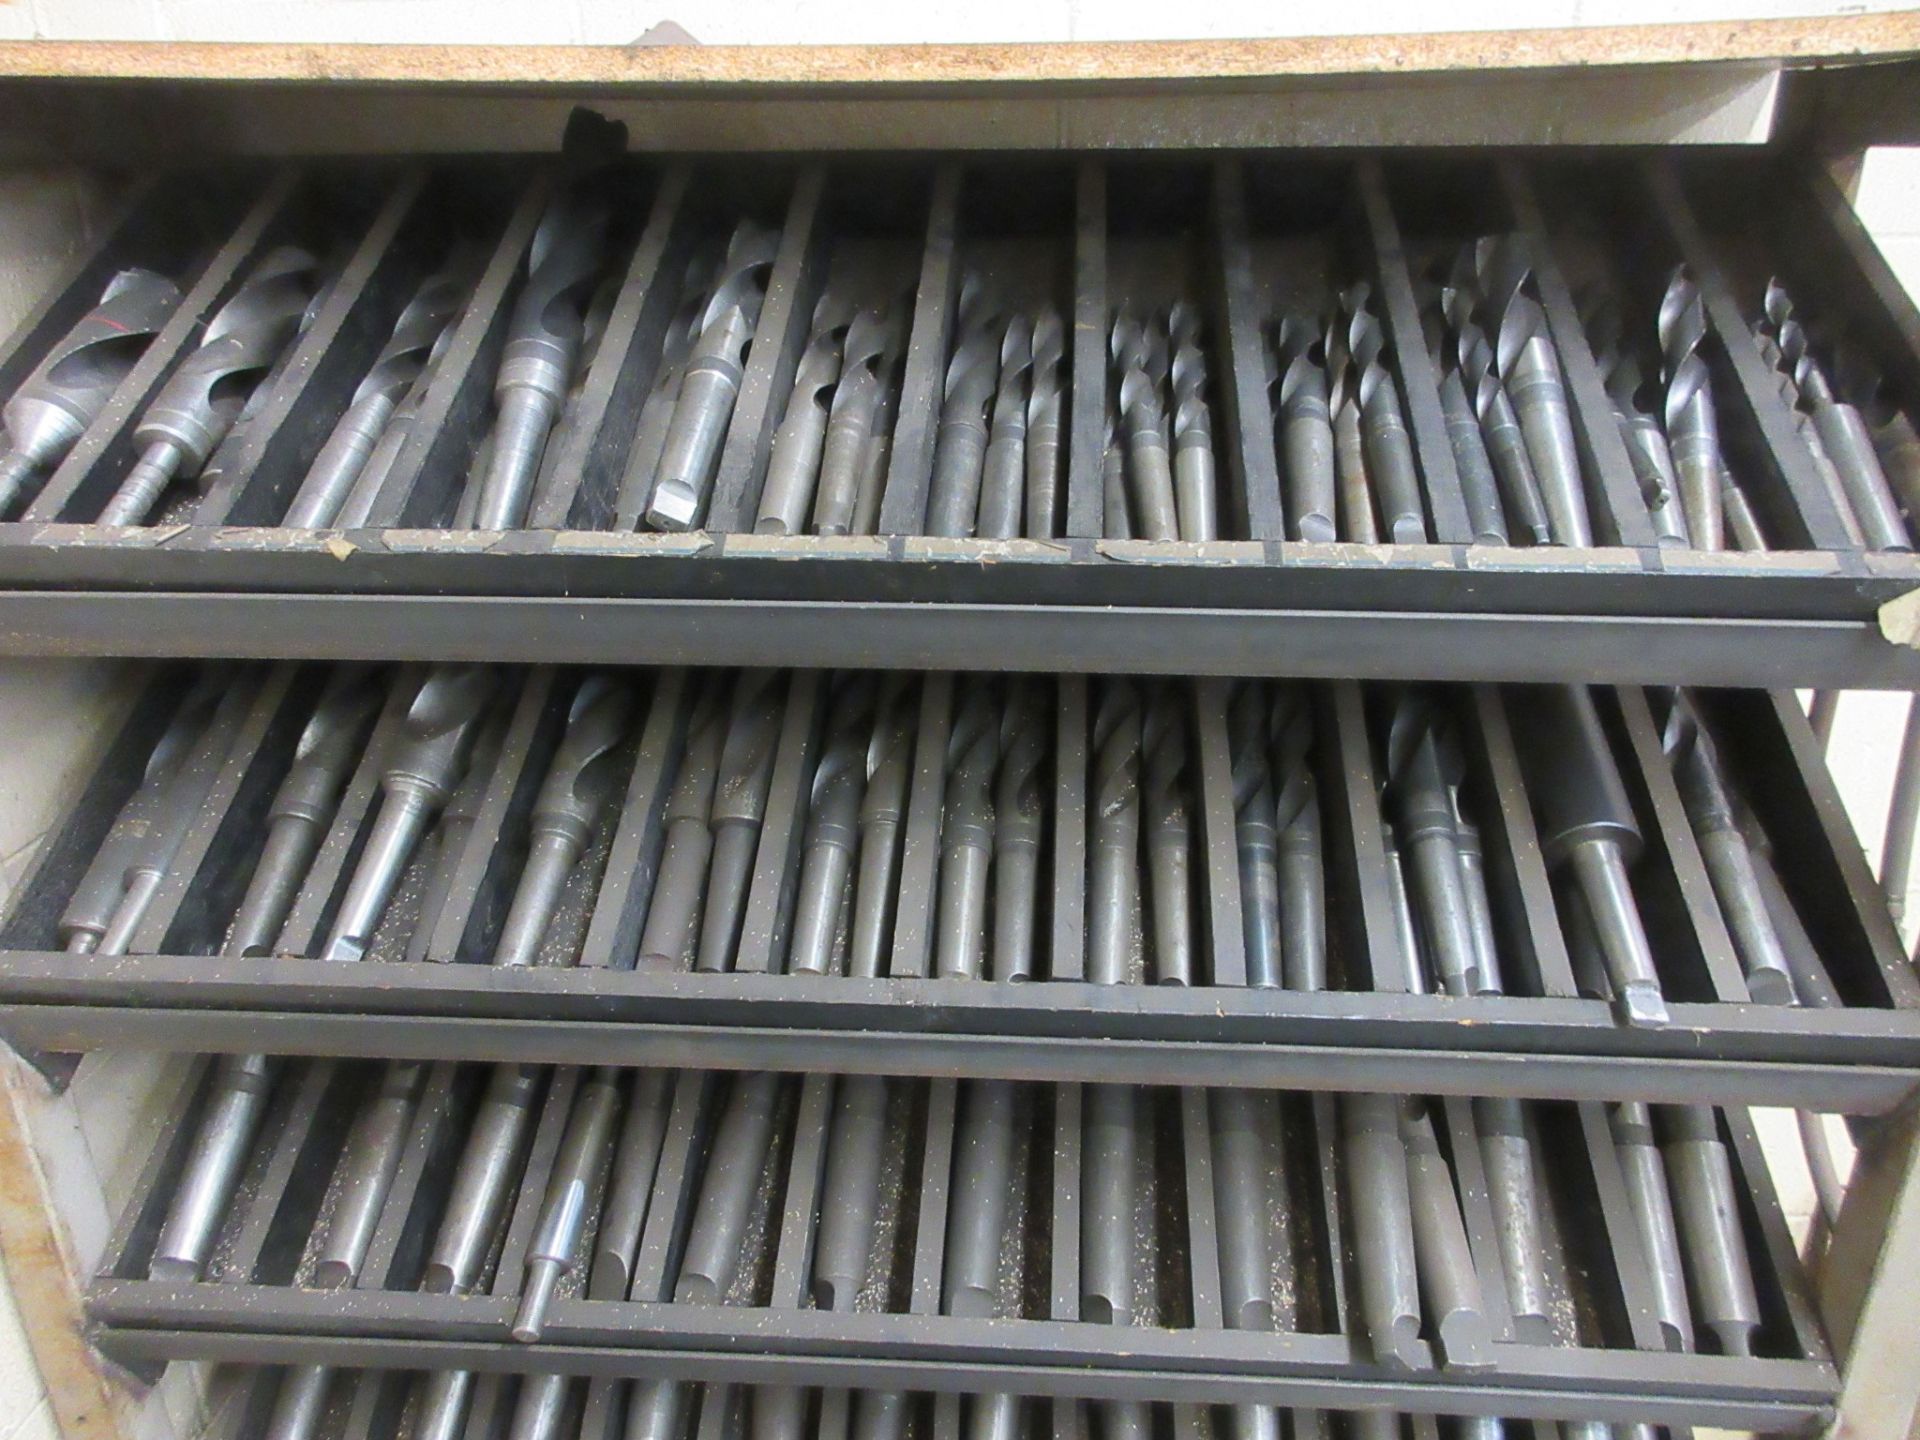 5-LEVEL DRILL BIT STORAGE CABINET (12 SLOTS PER LEVEL = 60 TOTAL SLOTS) W/ DRILLS AND BORING DRILLS, - Image 3 of 6